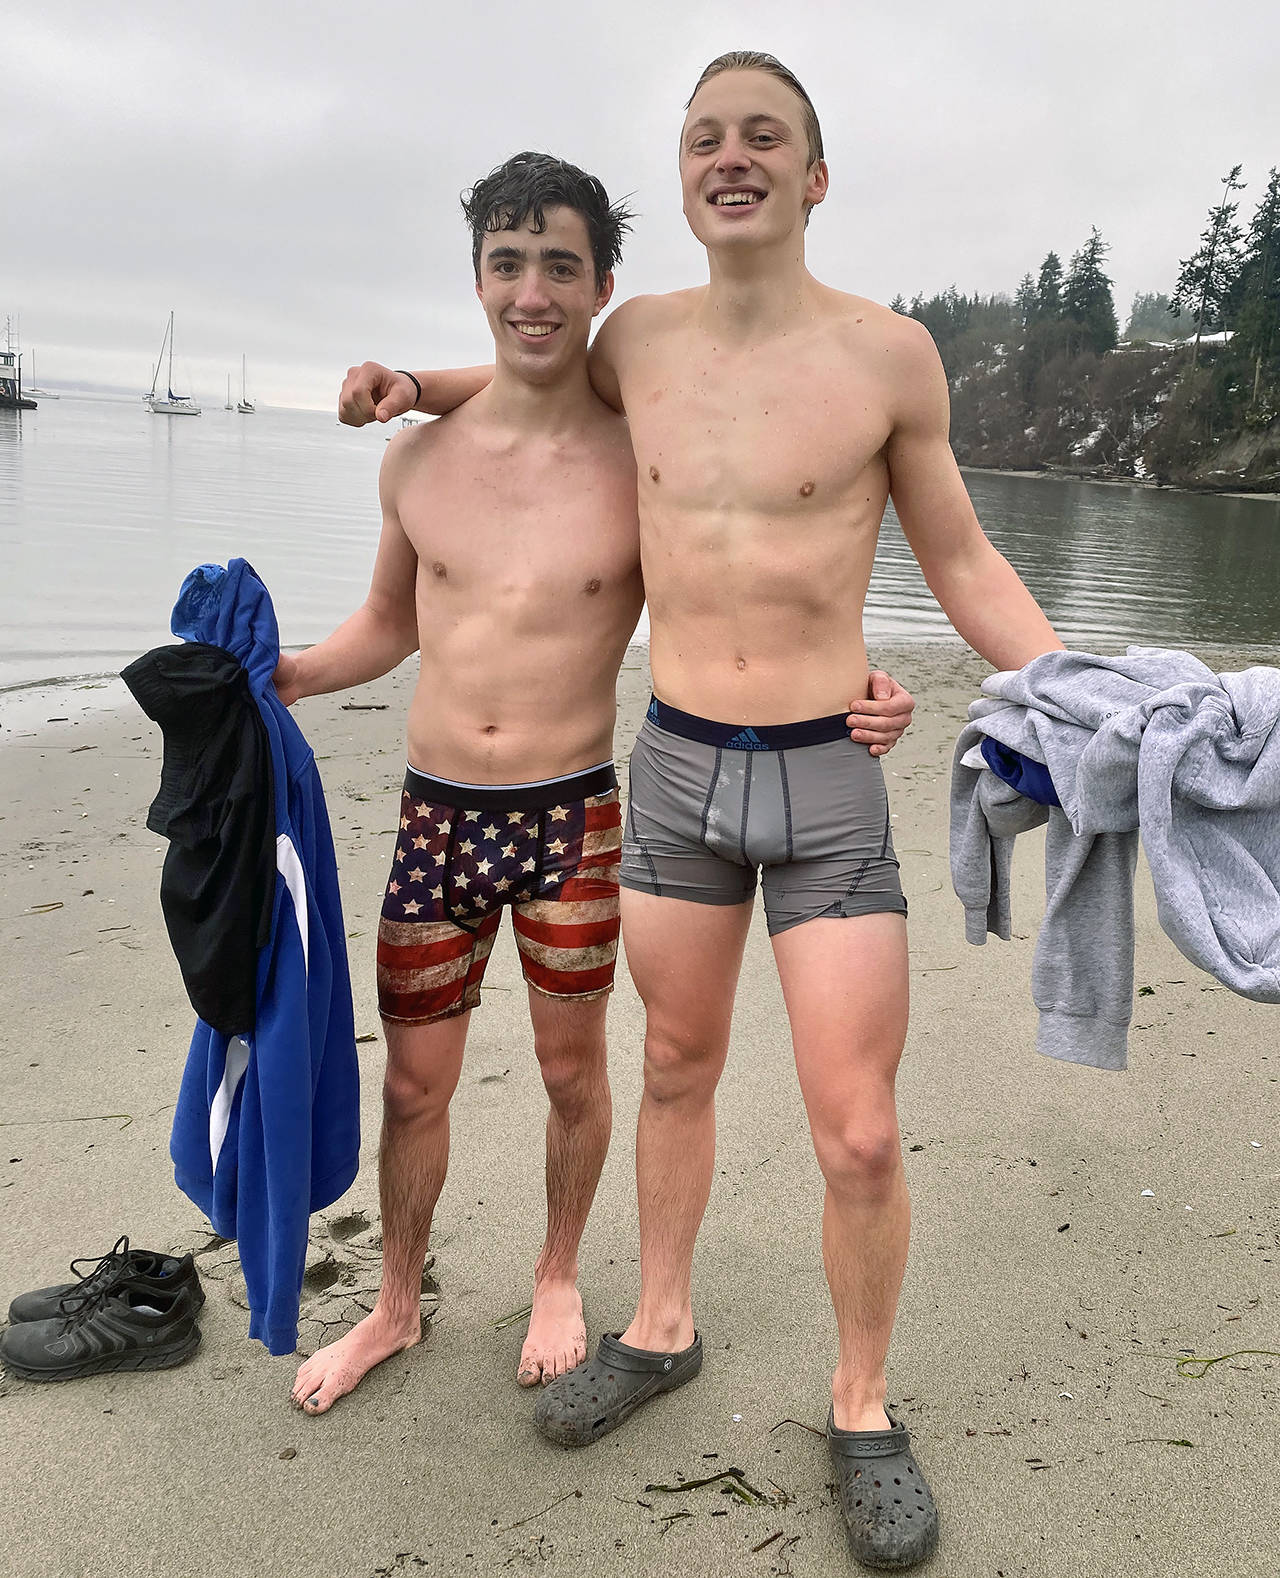 Whidbey athletes Cooper Ullmann, 18, and Kai Fawcett, 17, shed their shorts and wear boxer briefs to dunk in the Sound. (Andrea Brown / The Herald)